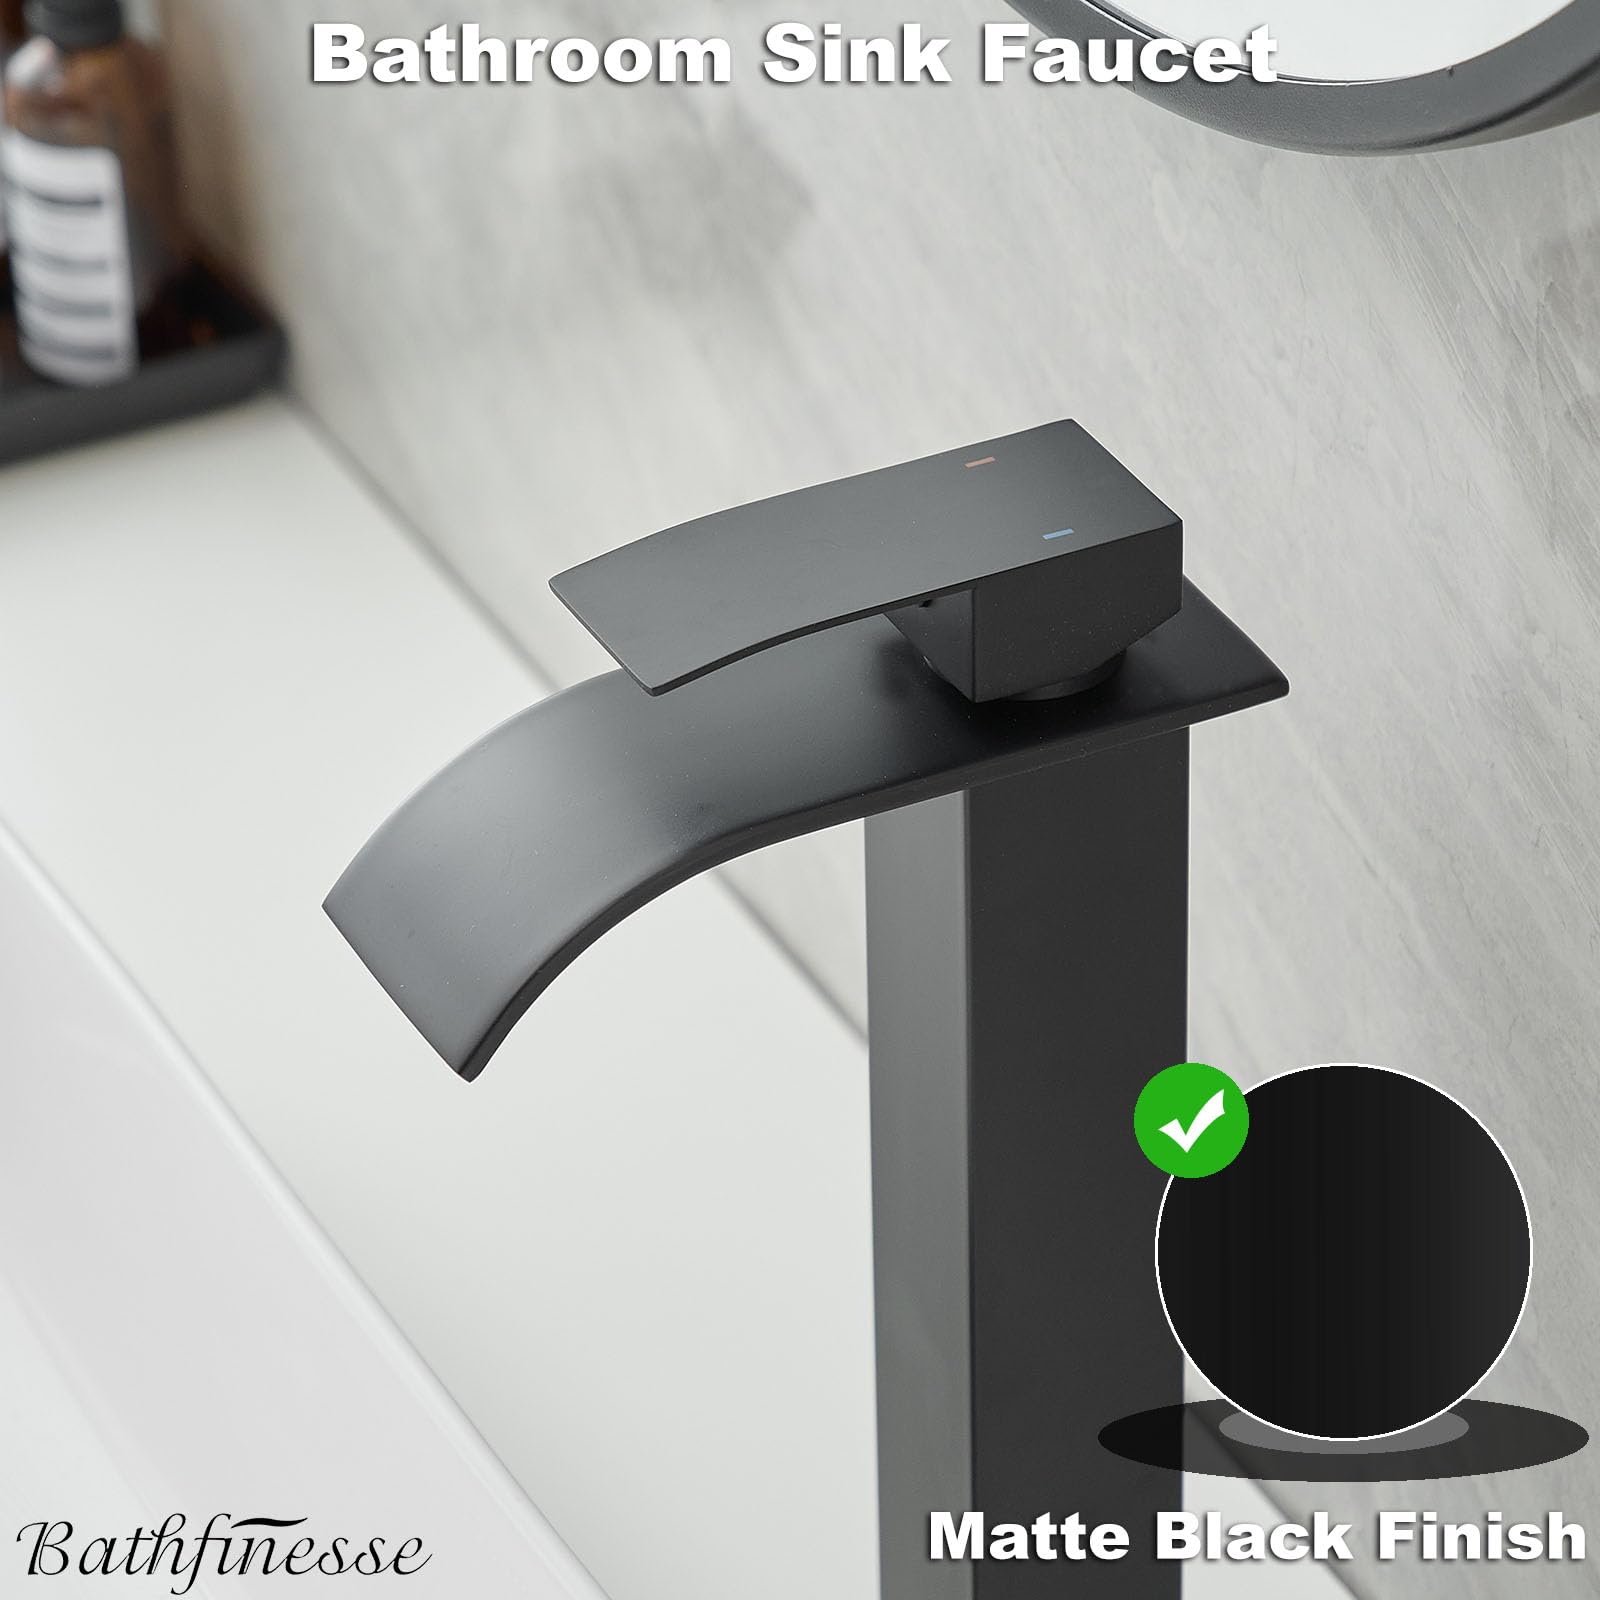 Bathfinesse Vessel Sink Faucet Waterfall Bathroom Faucet Matte Black Stainless Steel Tall Single Handle One Hole Deck Mount Bowl Vanity Sink Faucet with Pop-up Drain Stopper